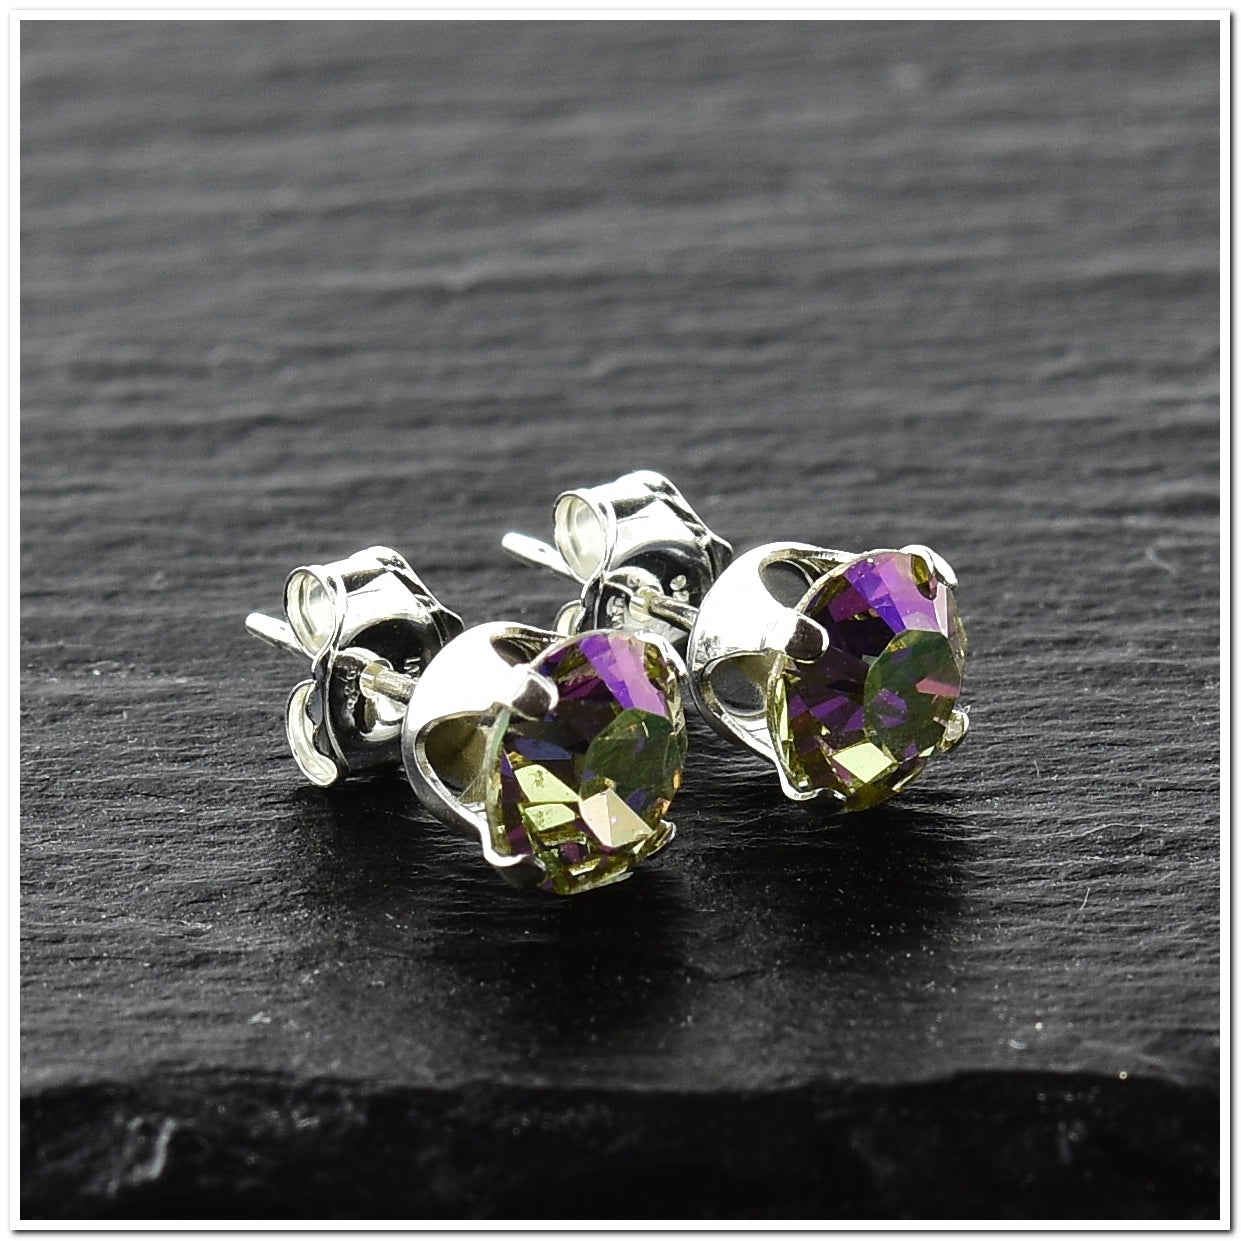 pewterhooter® Women's Classic Collection 925 Sterling silver earrings with sparkling Luminous Green crystals, packaged in a gift box for any occasion.